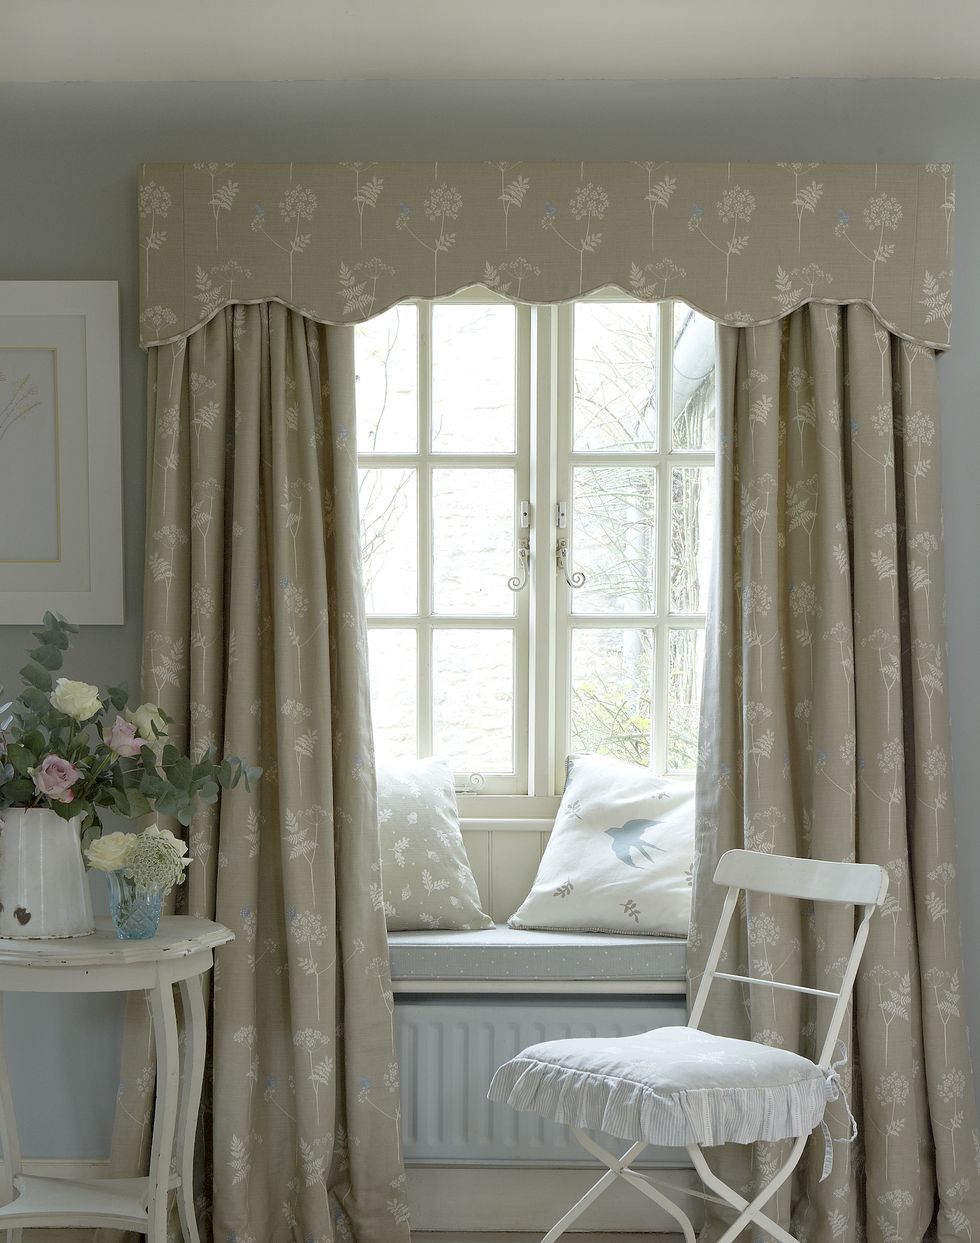 Why Cow Parsley Print Is A Timeless Summer's Interiors Trend